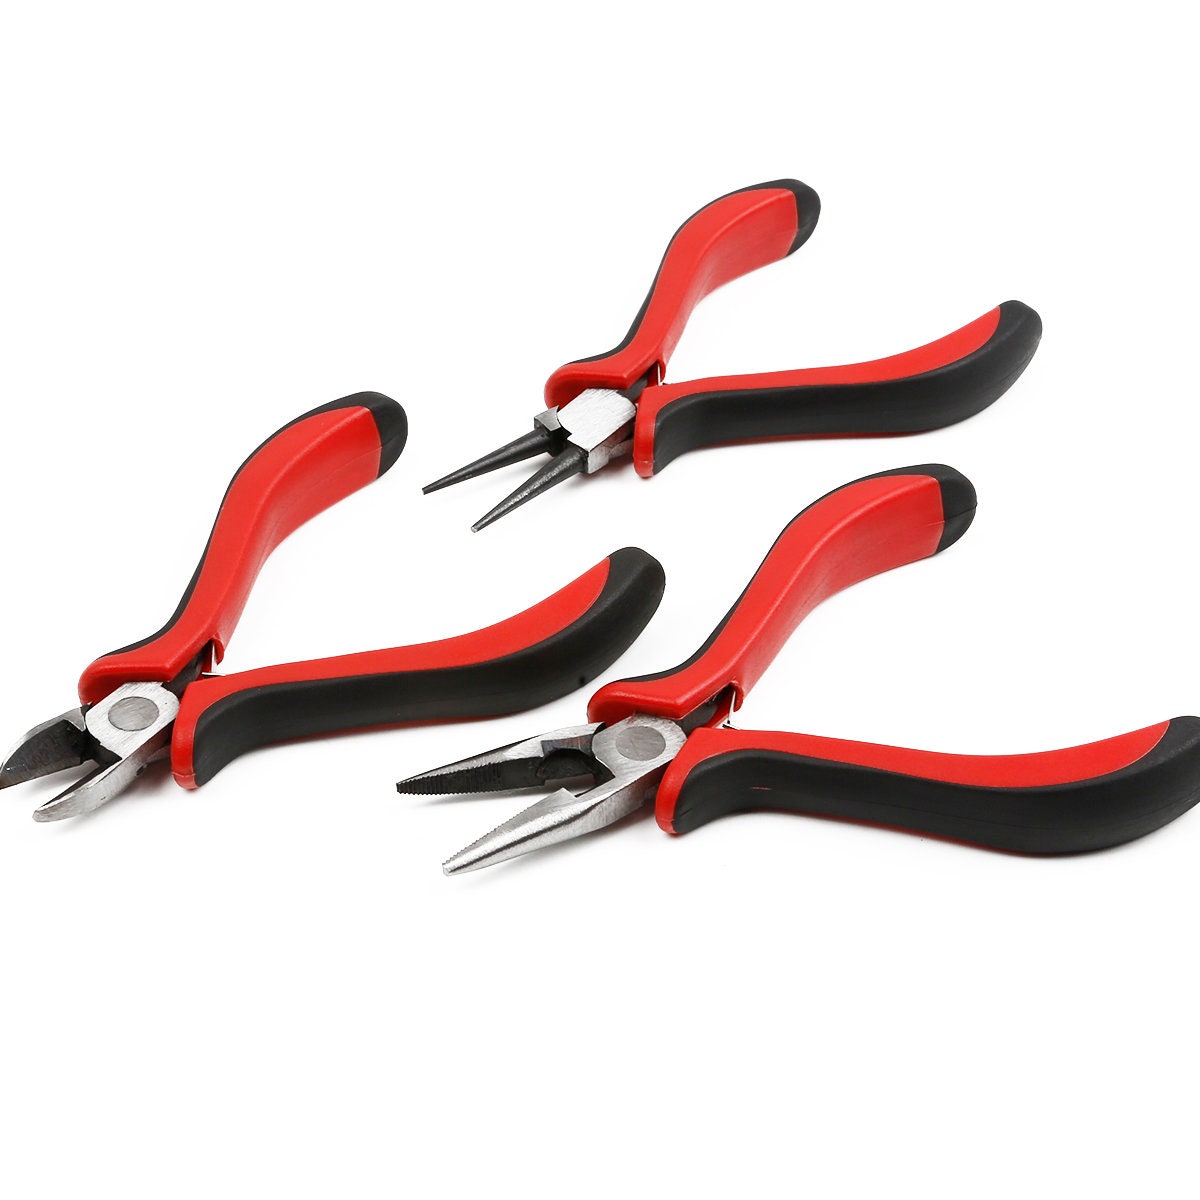 Multifunctional Hand Tools Jewelry Pliers Equipment Round Nose End Cutting  Wire Pliers for Jewelry Making Handmade Accessories